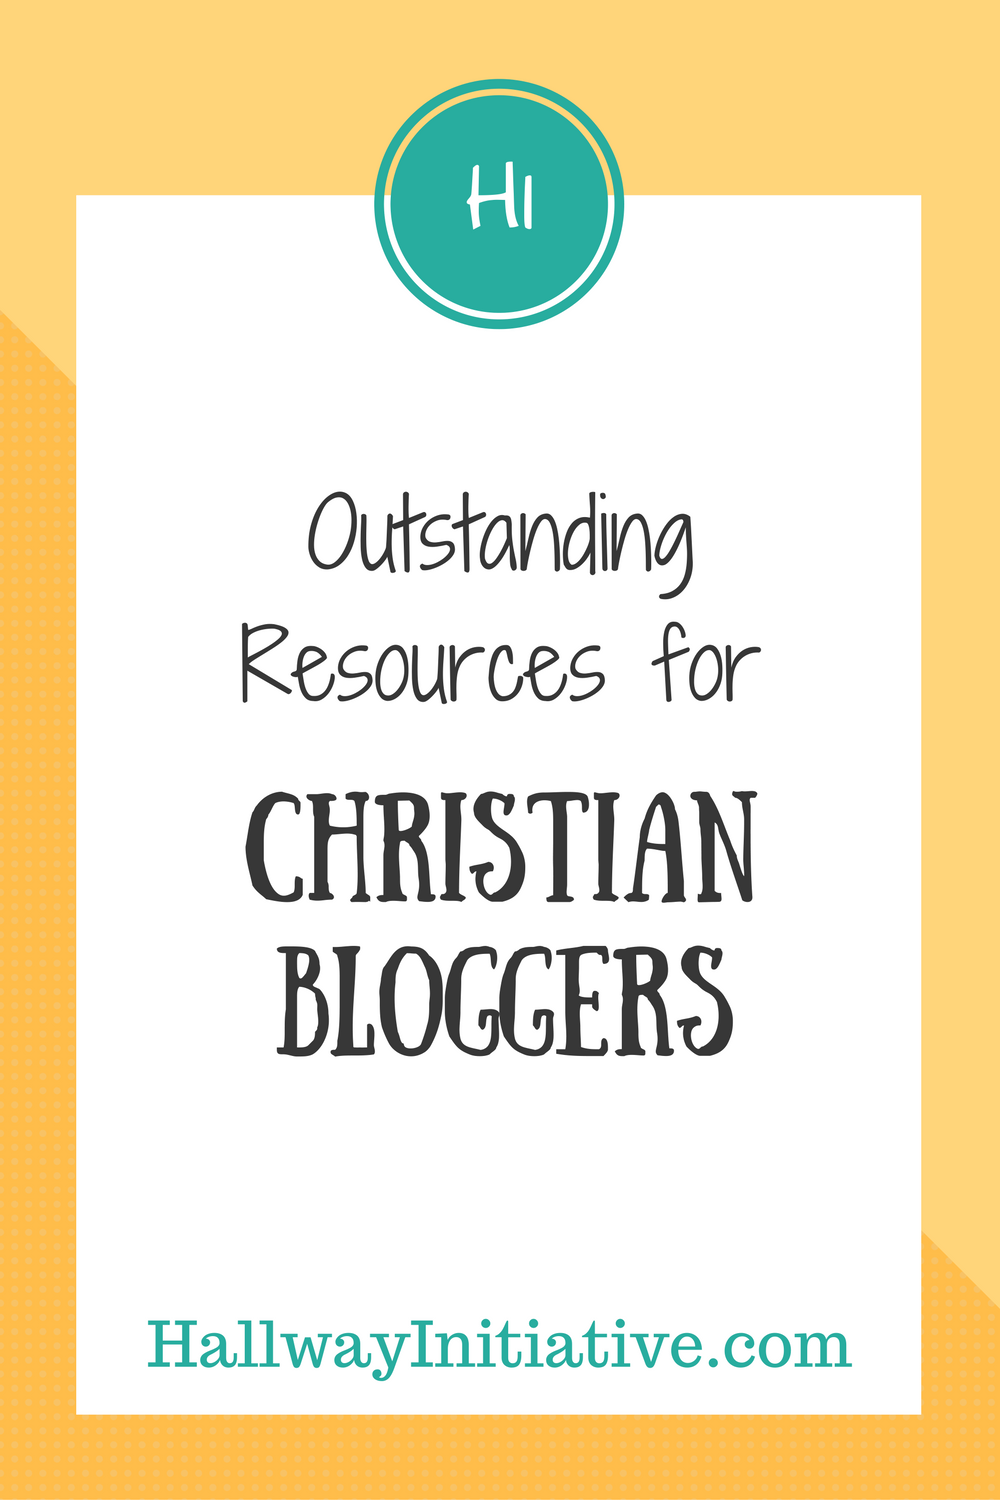 Outstanding resources for Christian bloggers